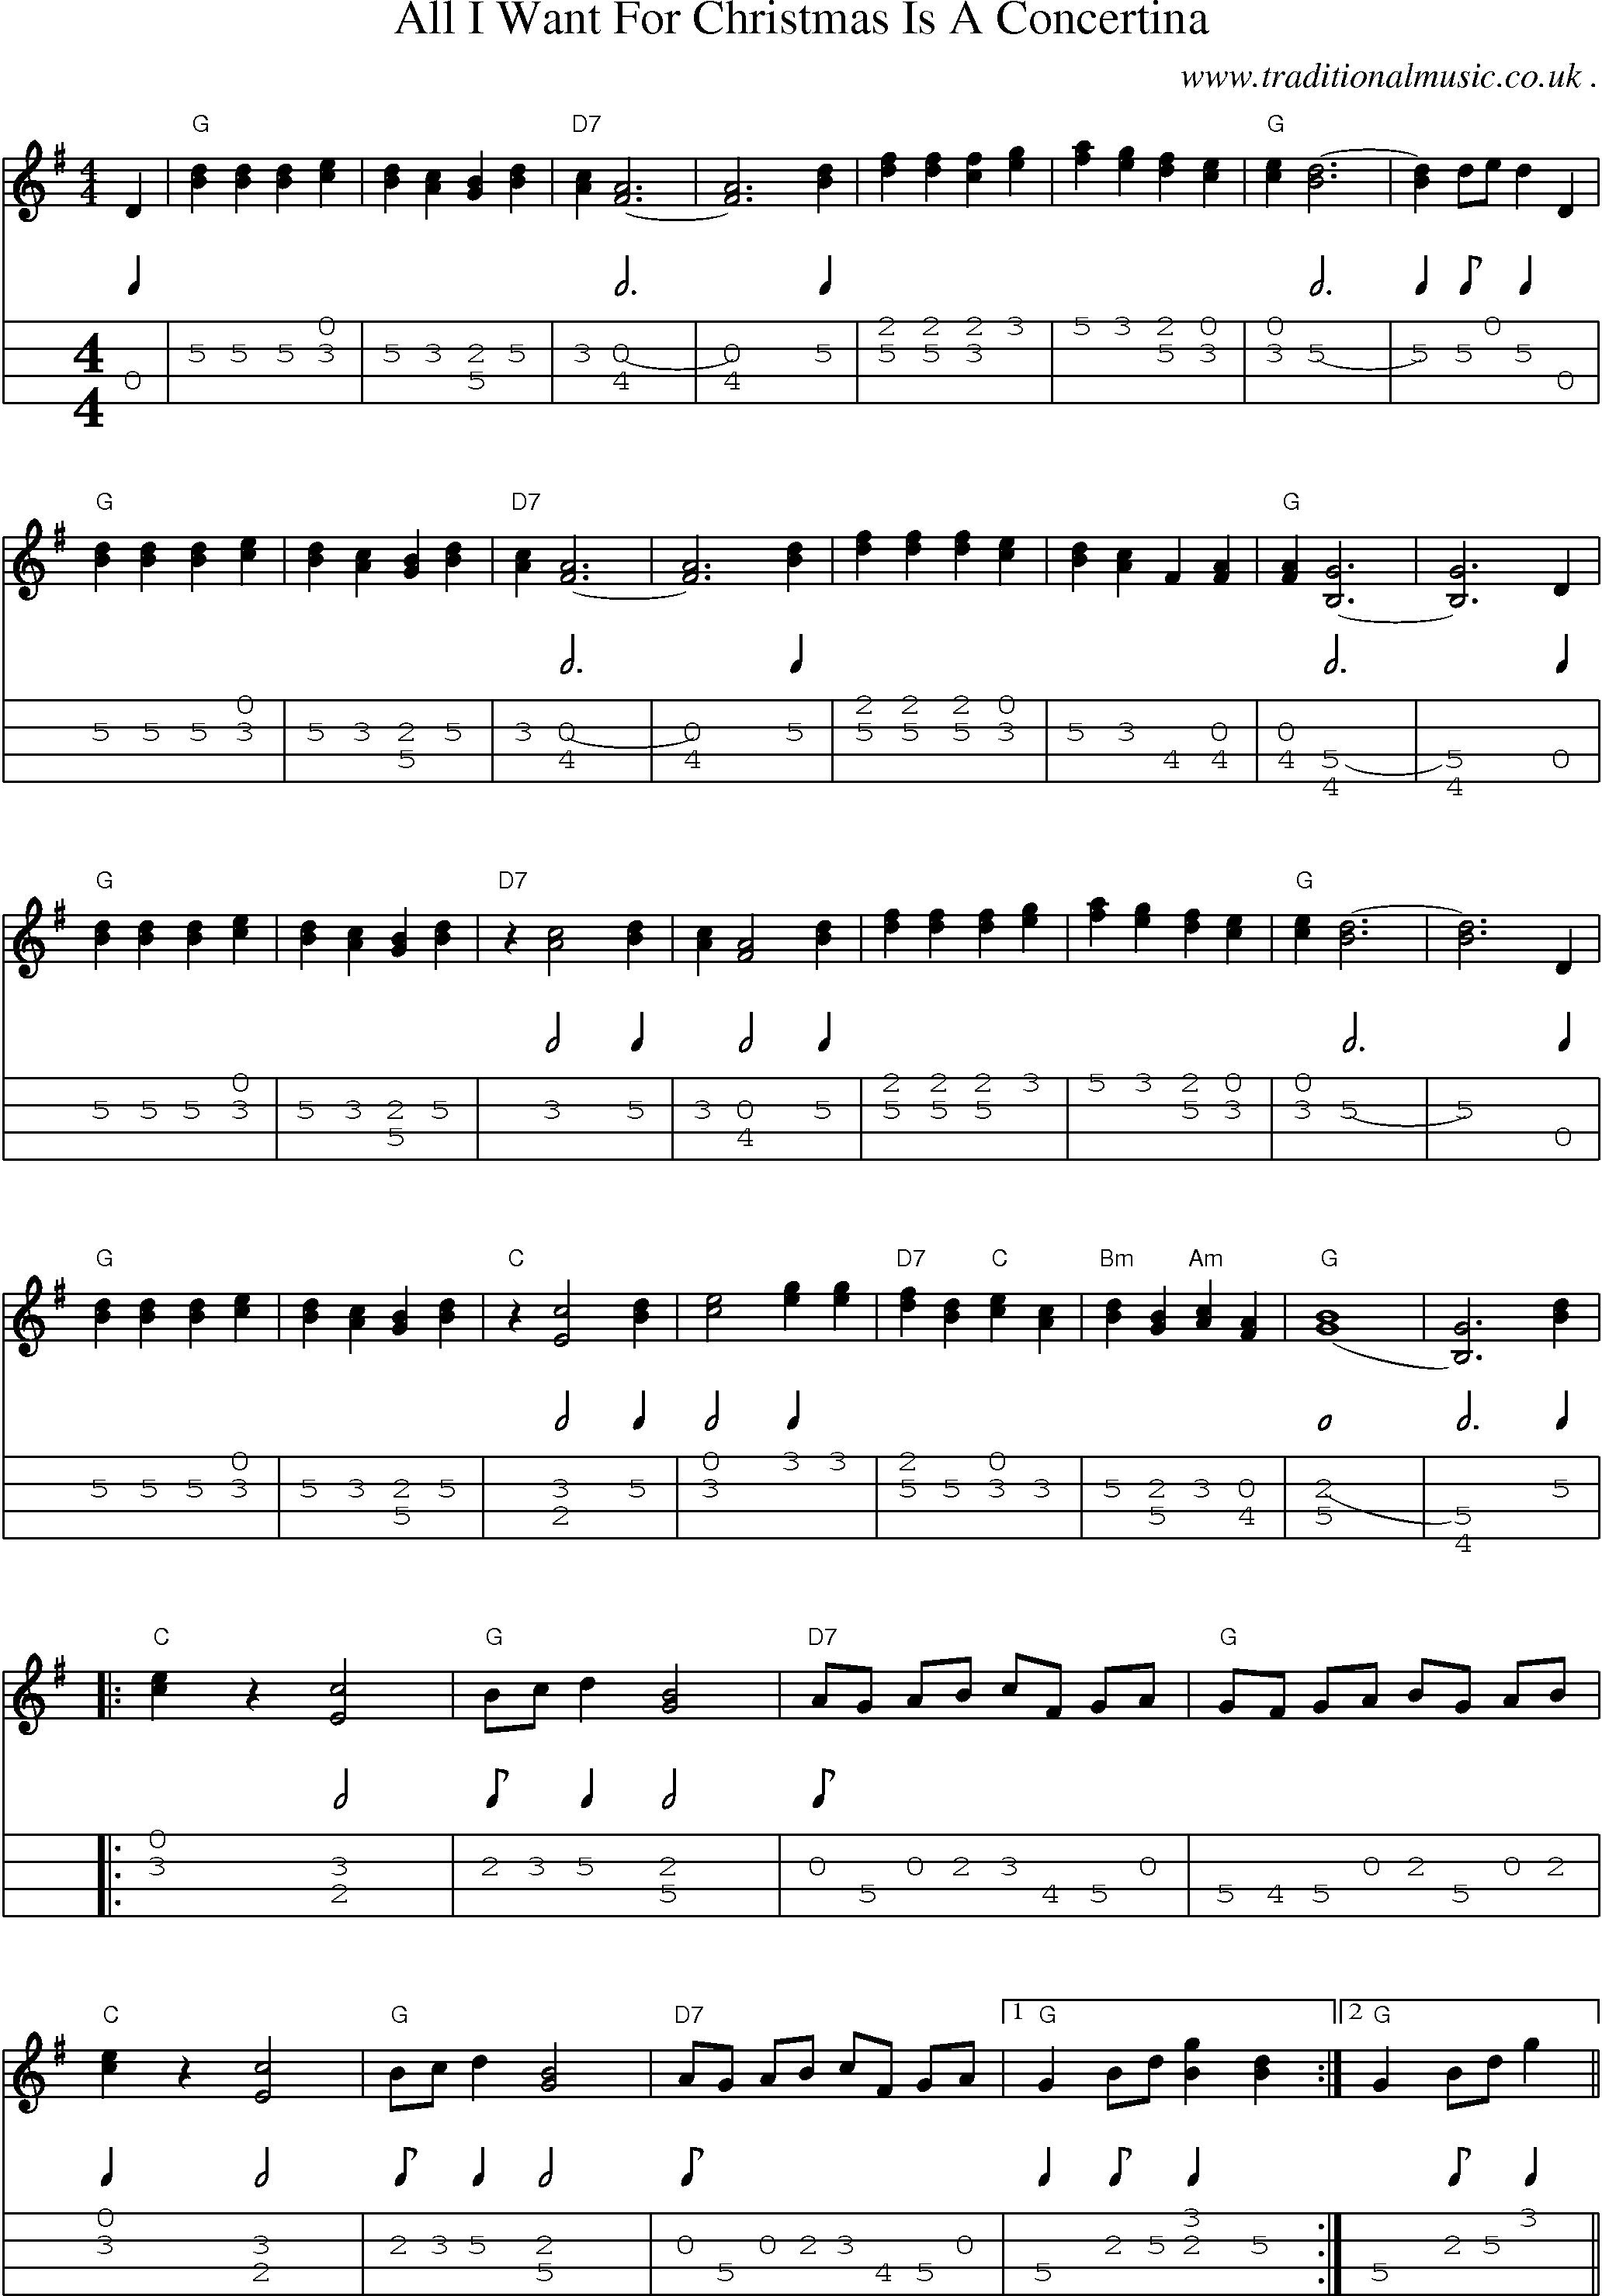 Sheet-Music and Mandolin Tabs for All I Want For Christmas Is A Concertina